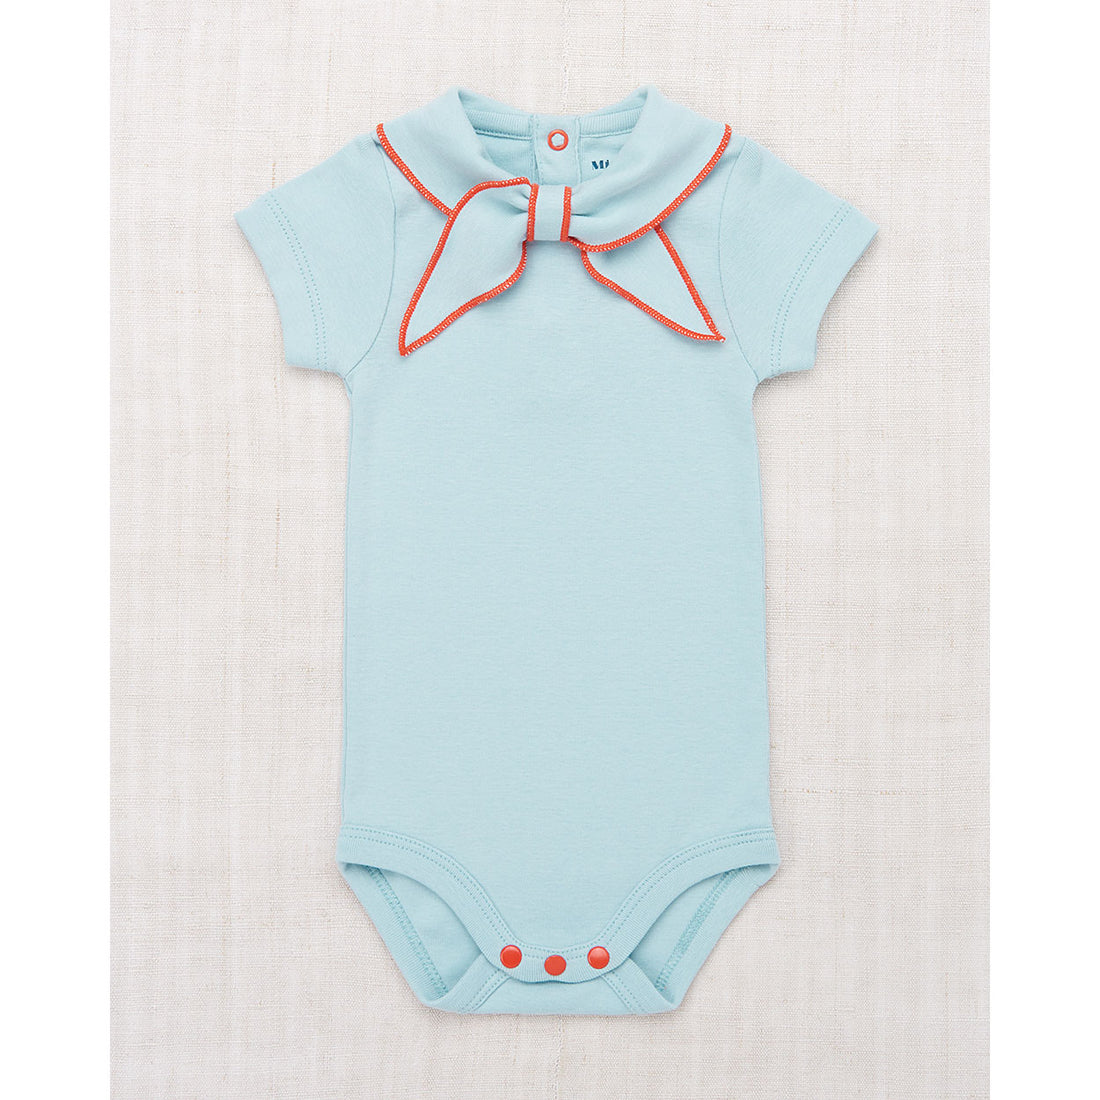 Misha and Puff Sky Short Sleeve Scout Onesie